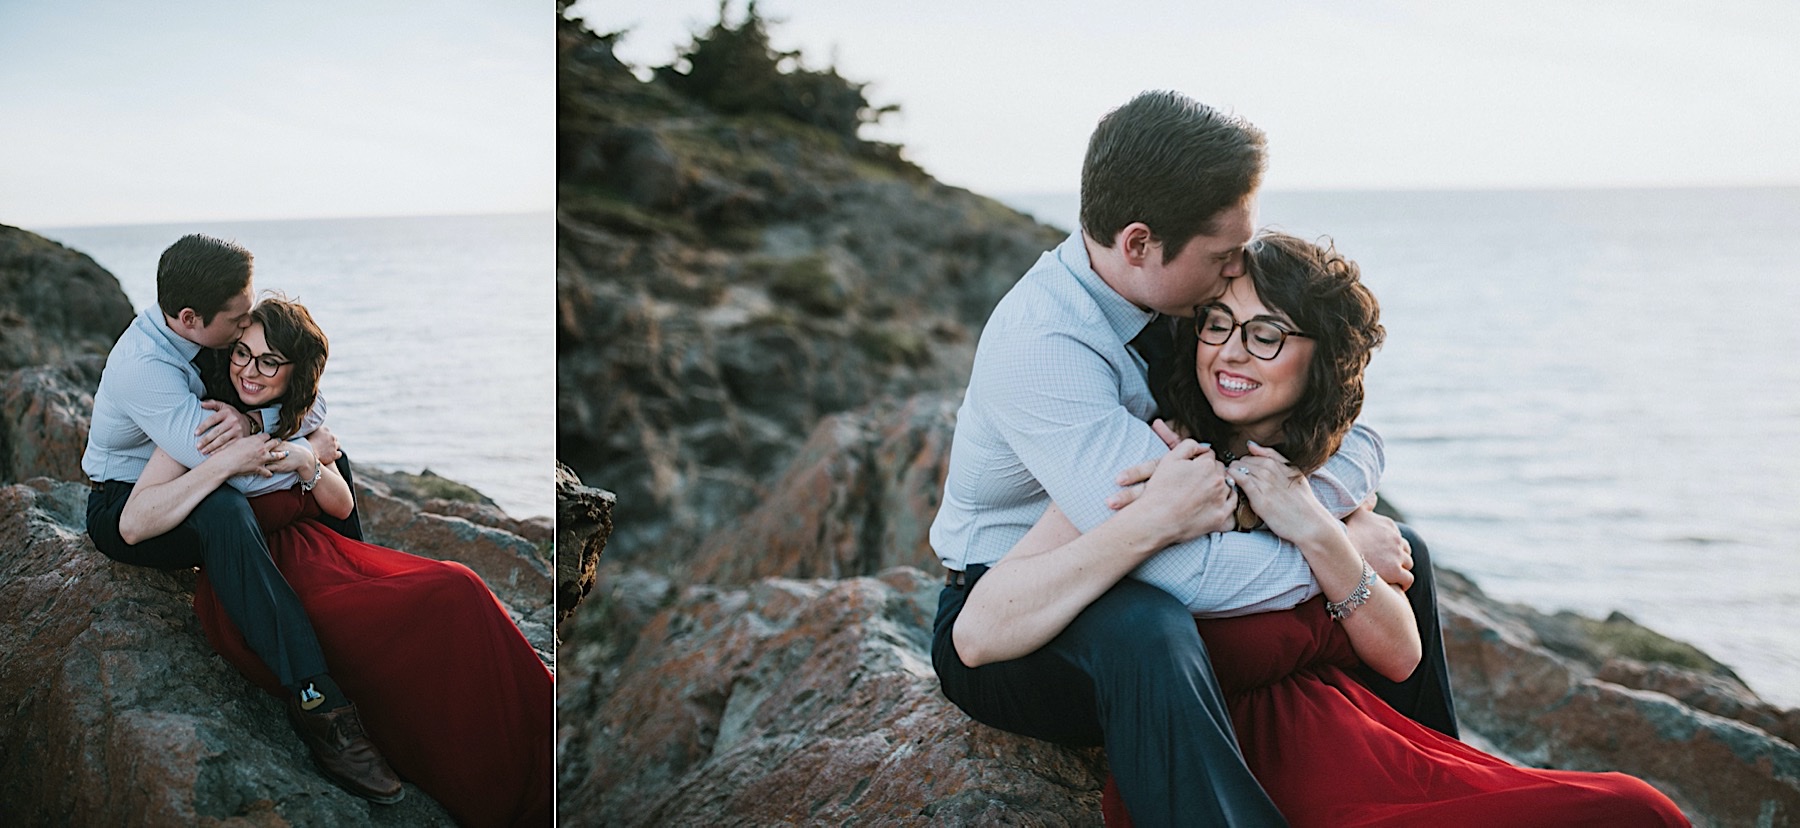 A couple sitting on rocks at Beluga Point with ocean backdrop, he is wrapping her up in his arms